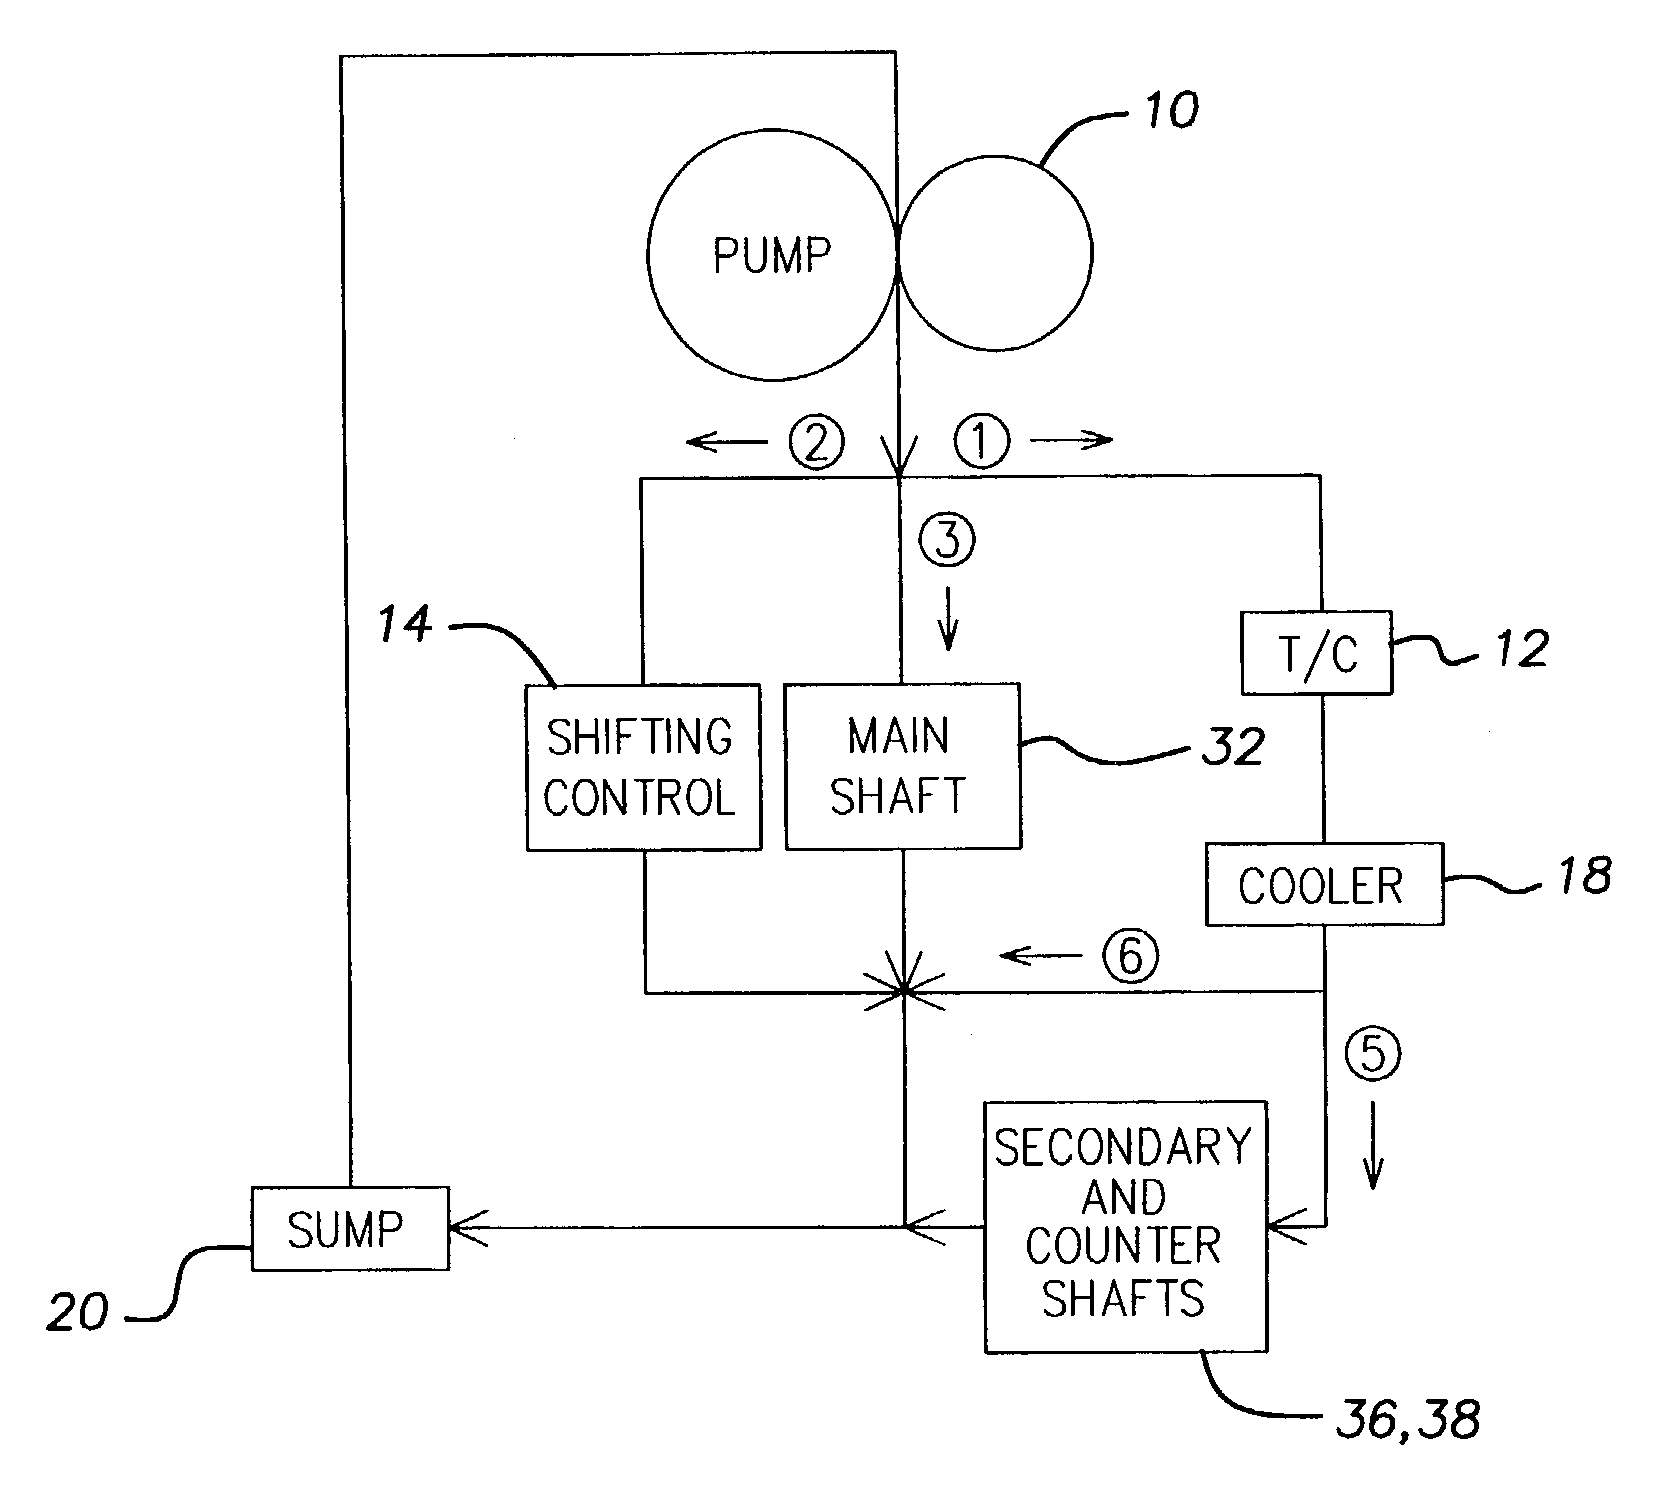 Transmission lubricant cooling system